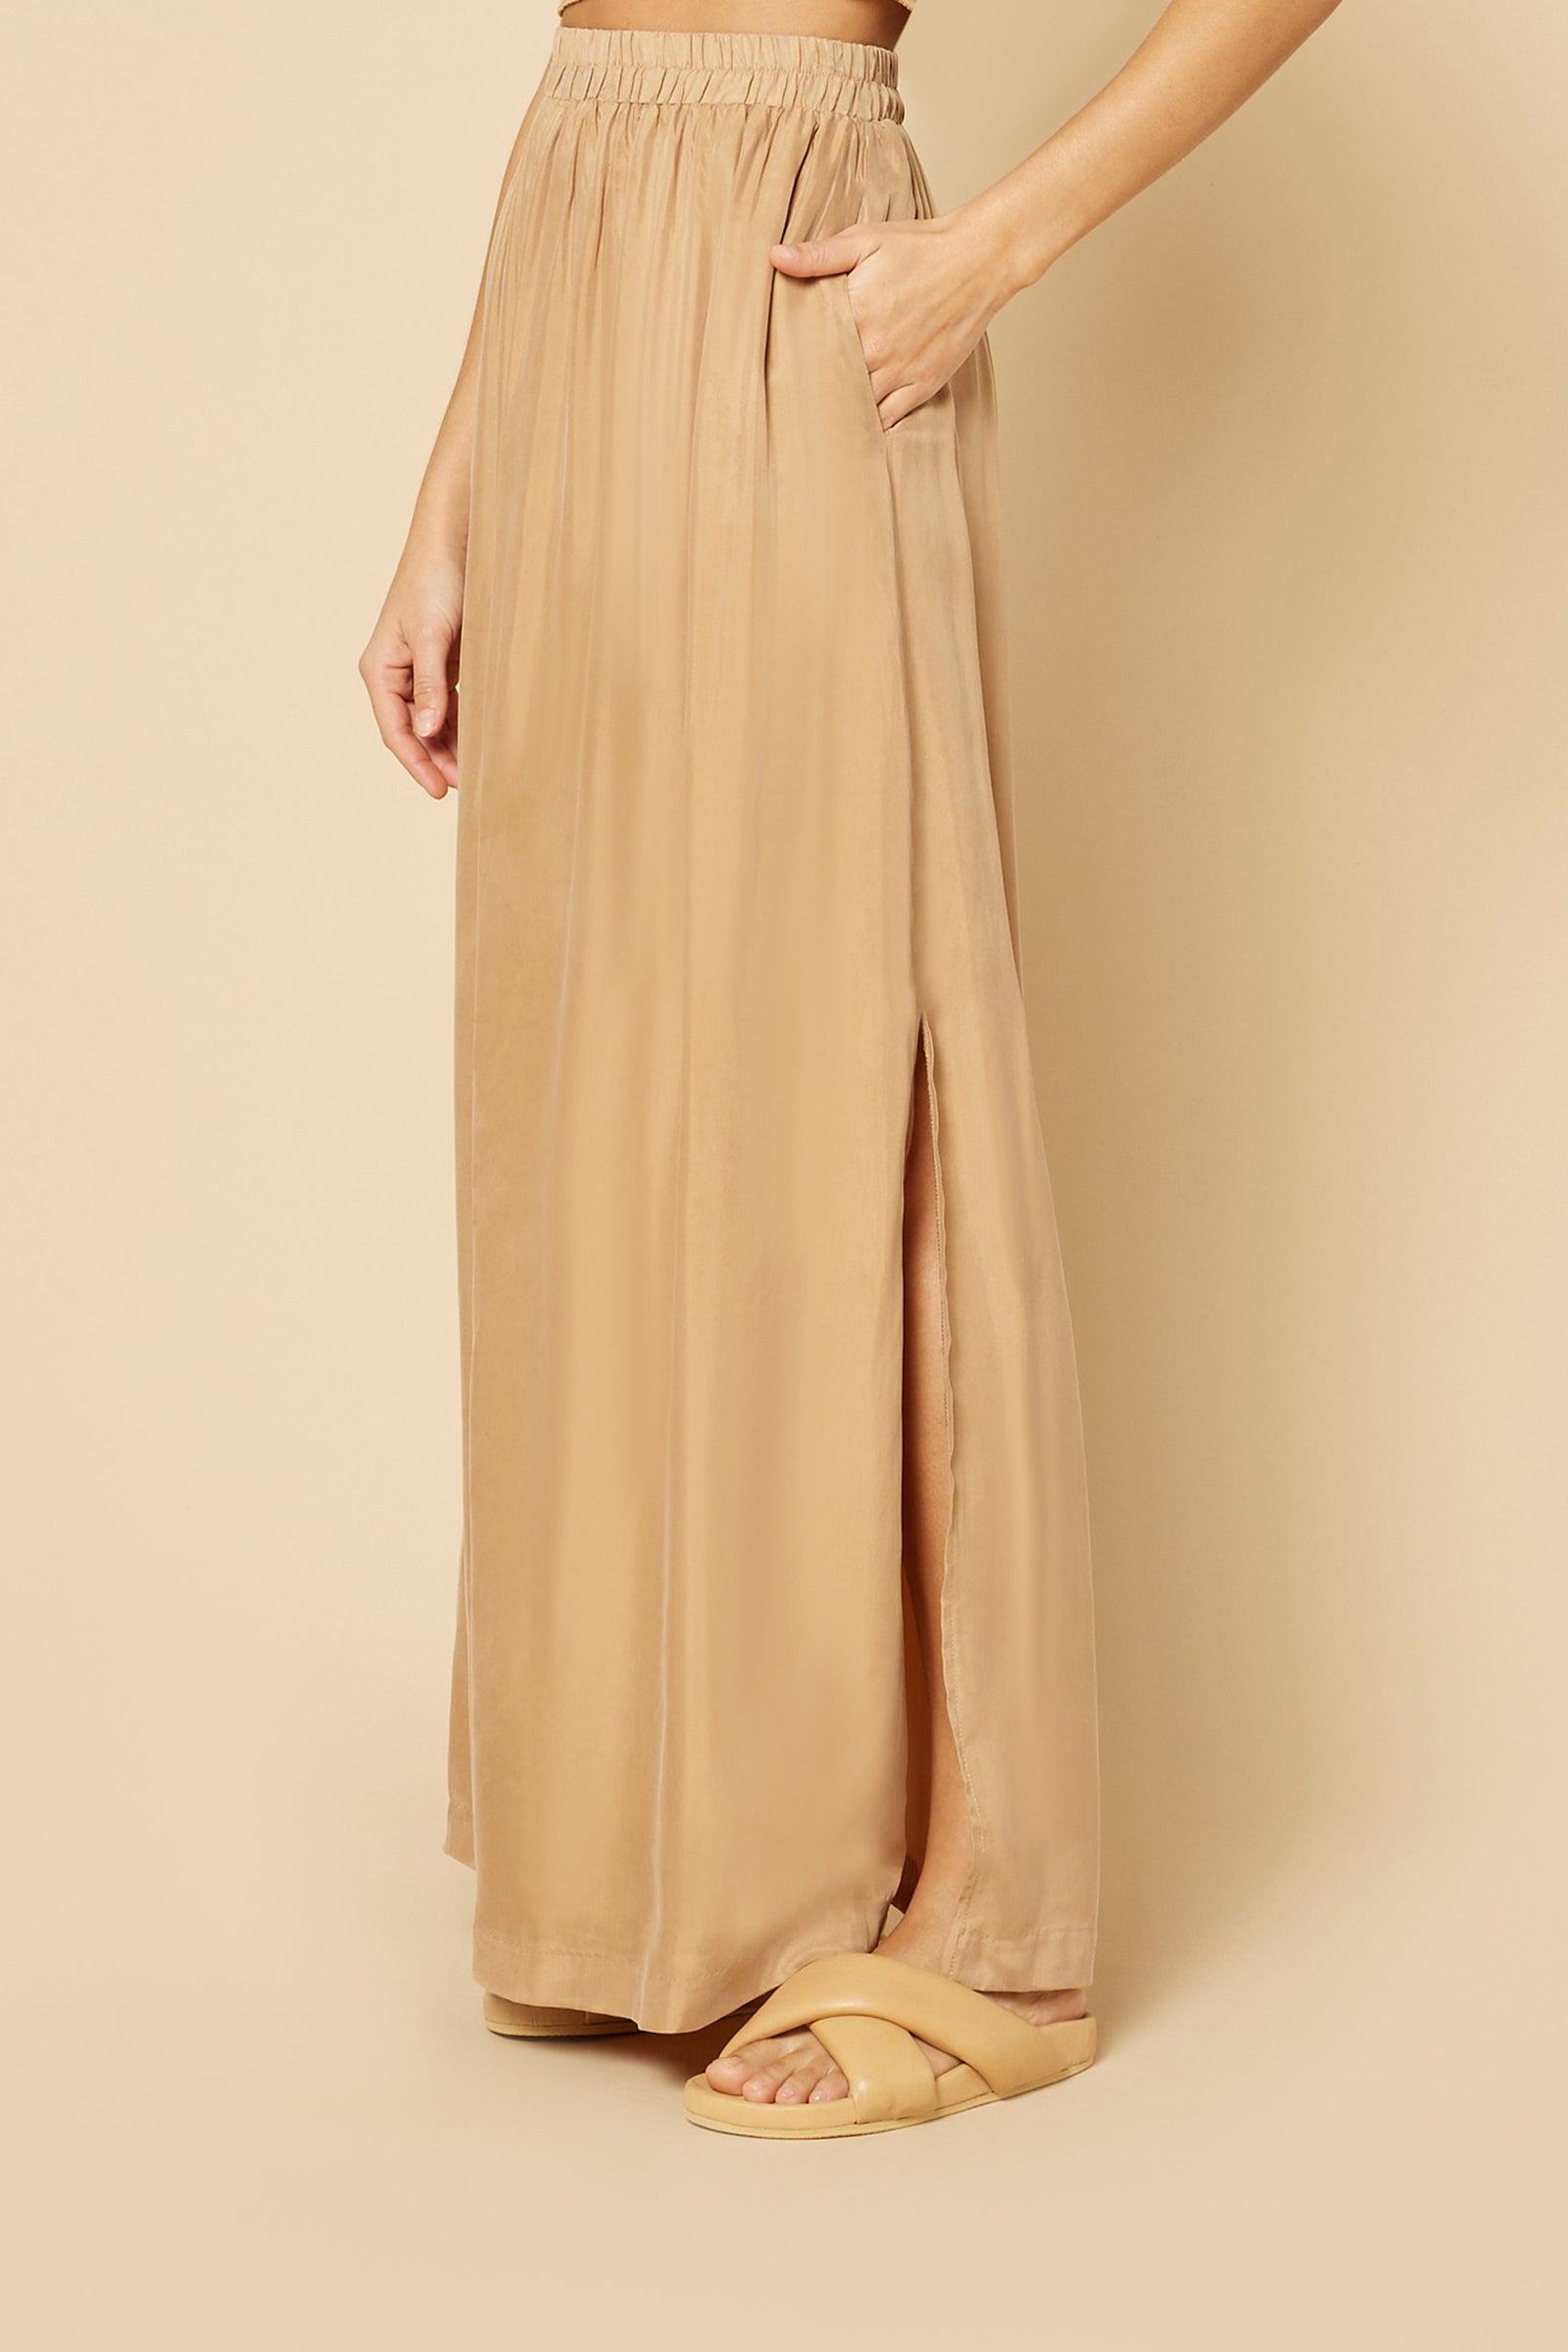 Nude Lucy Gia Cupro Maxi Skirt In A Light Brown Caramel Colour 